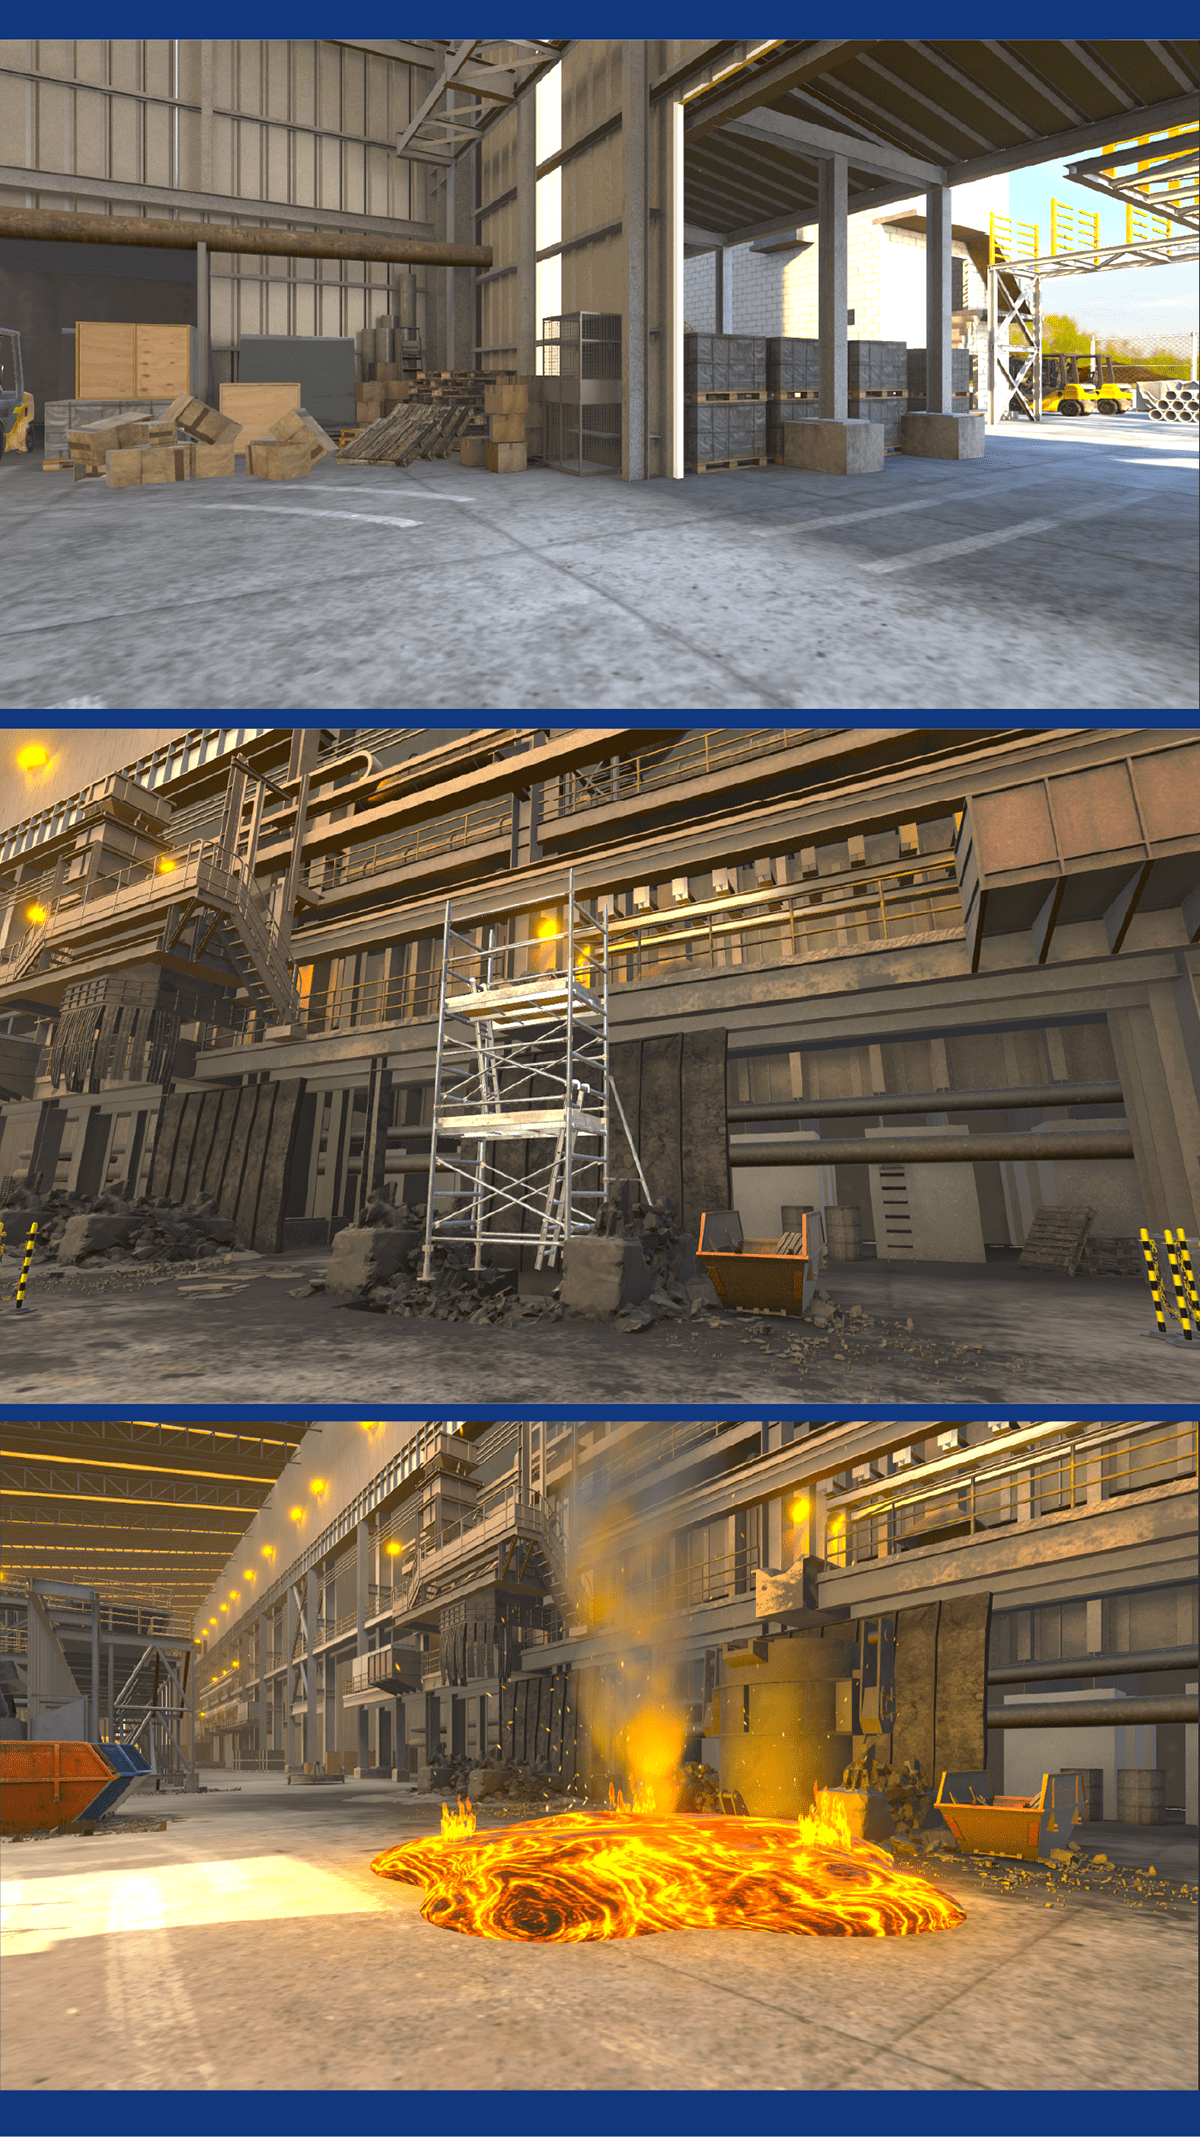 anglo american vr experience image breakdown